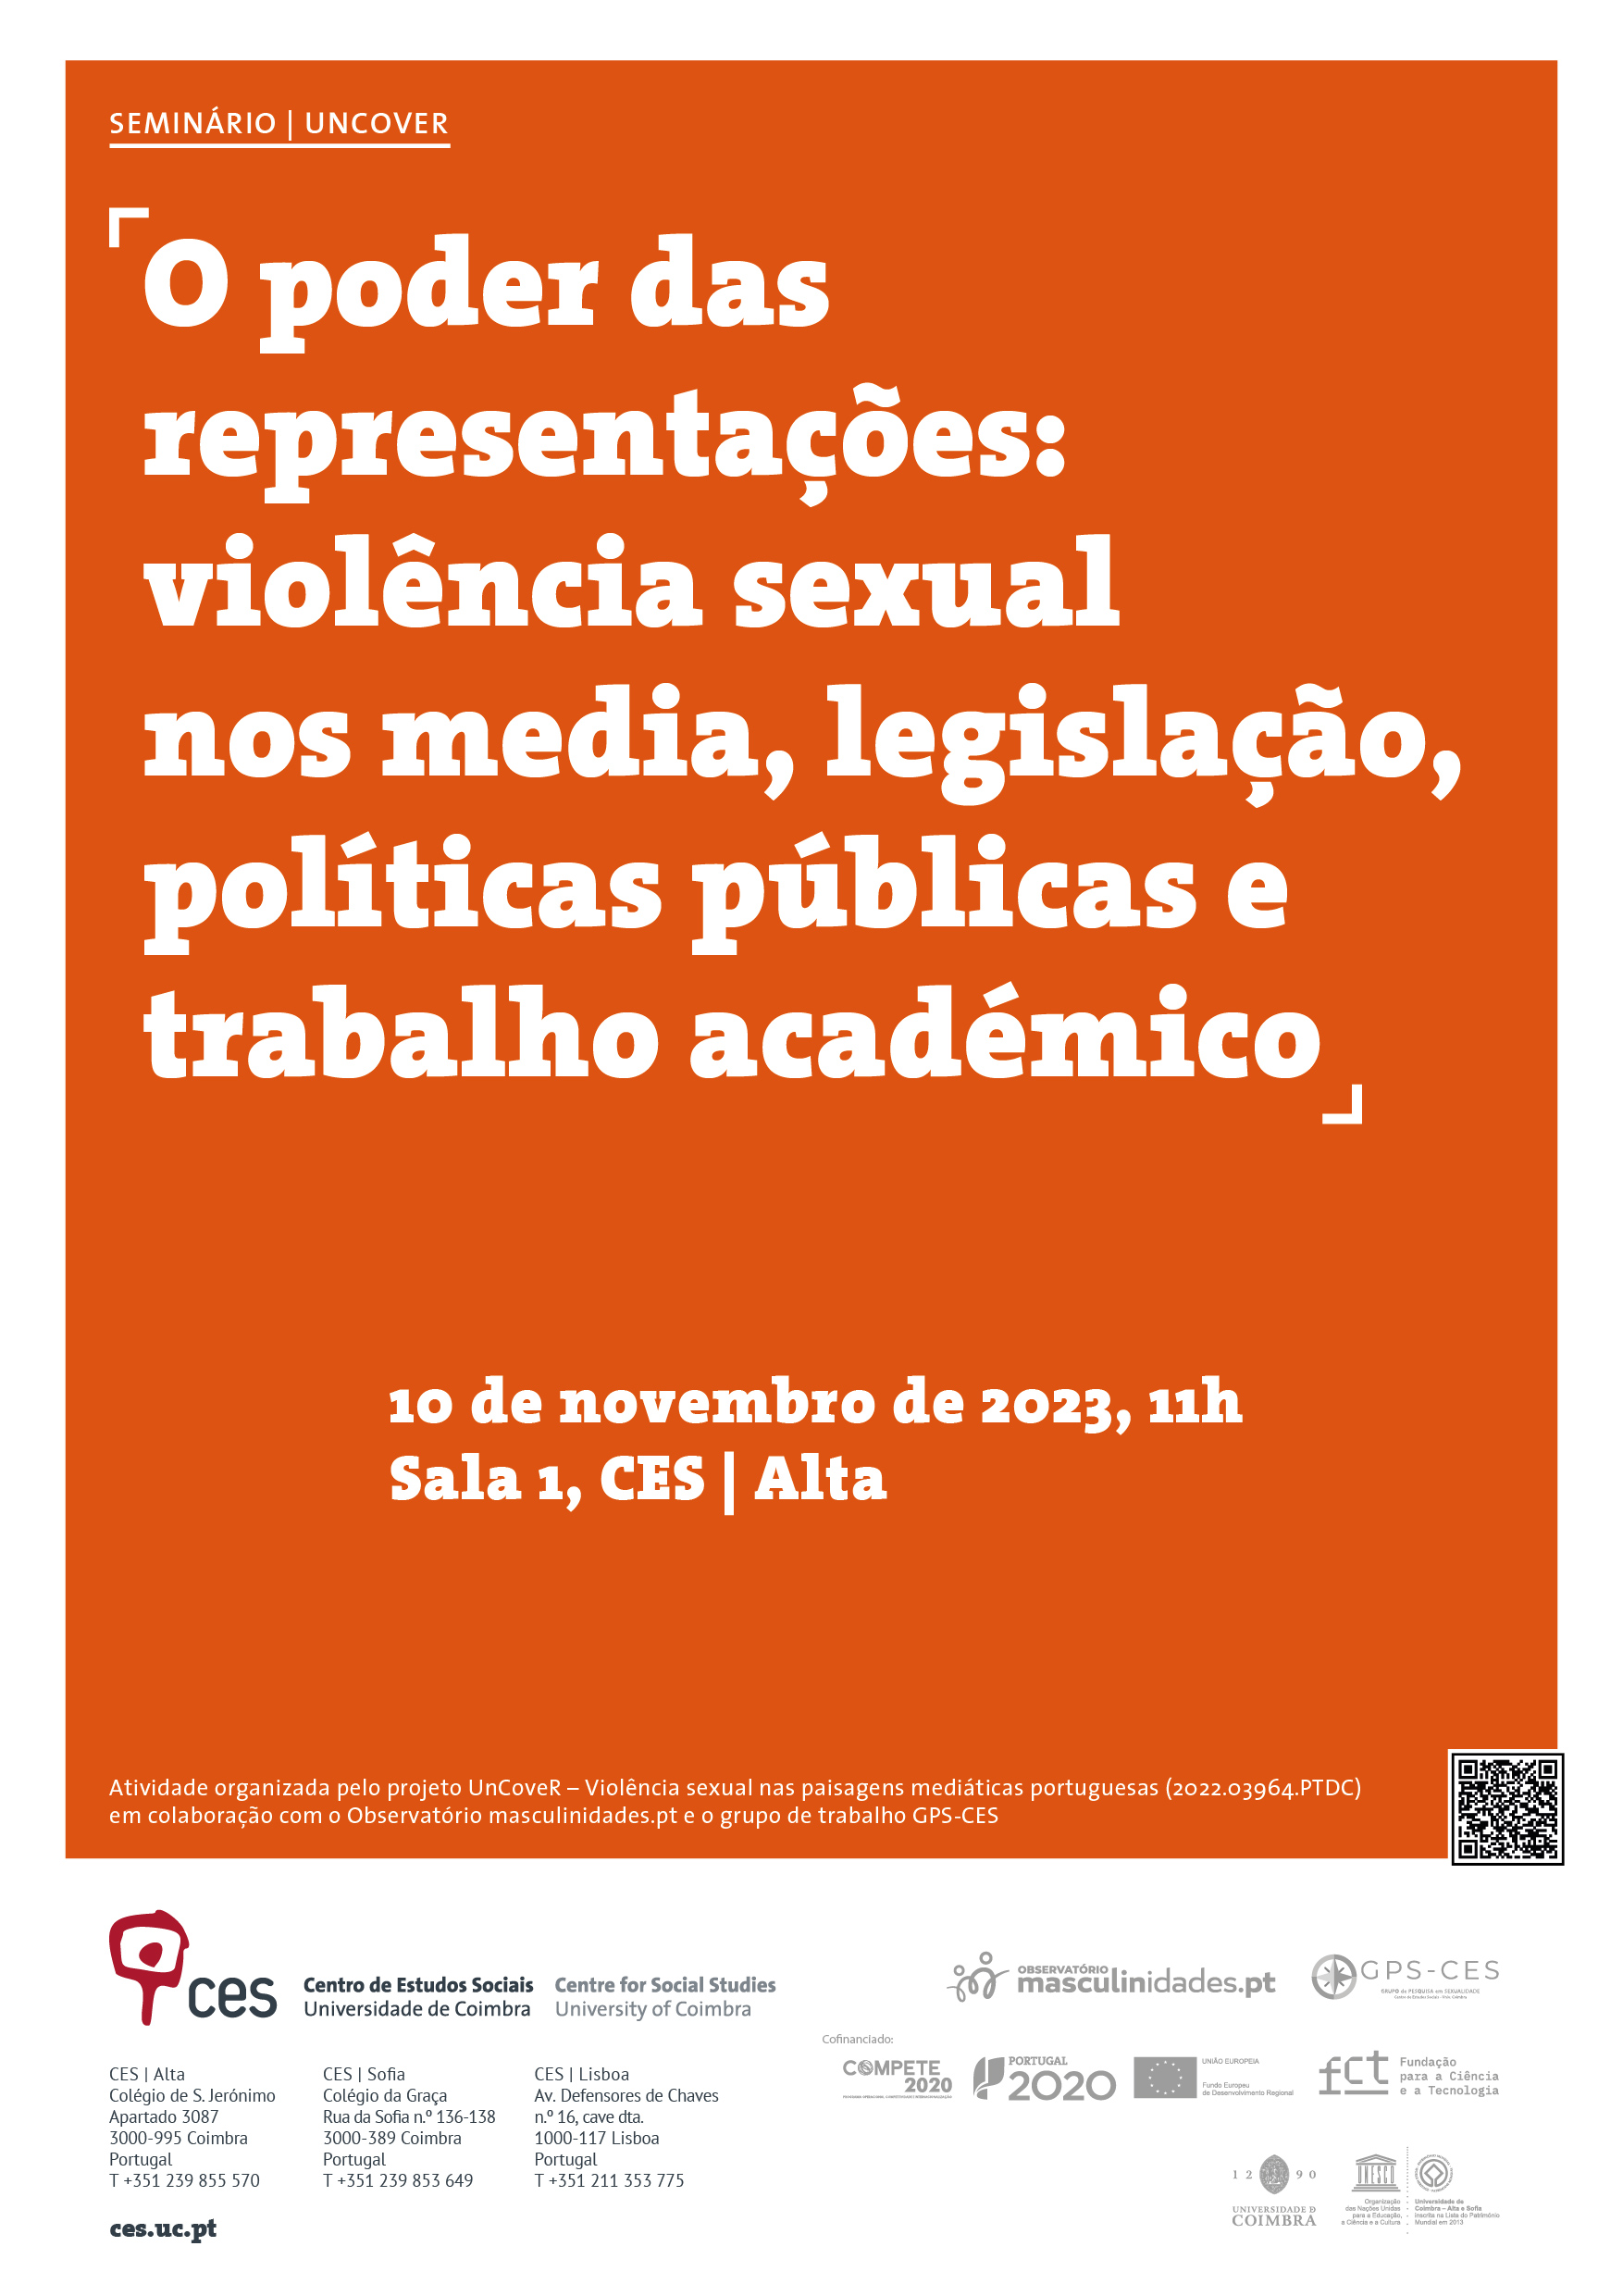 The power of representations: sexual violence in the media, legislation, public policies and academic work <br />
	 <span id="edit_44048"><script>$(function() { $('#edit_44048').load( "/myces/user/editobj.php?tipo=evento&id=44048" ); });</script></span>